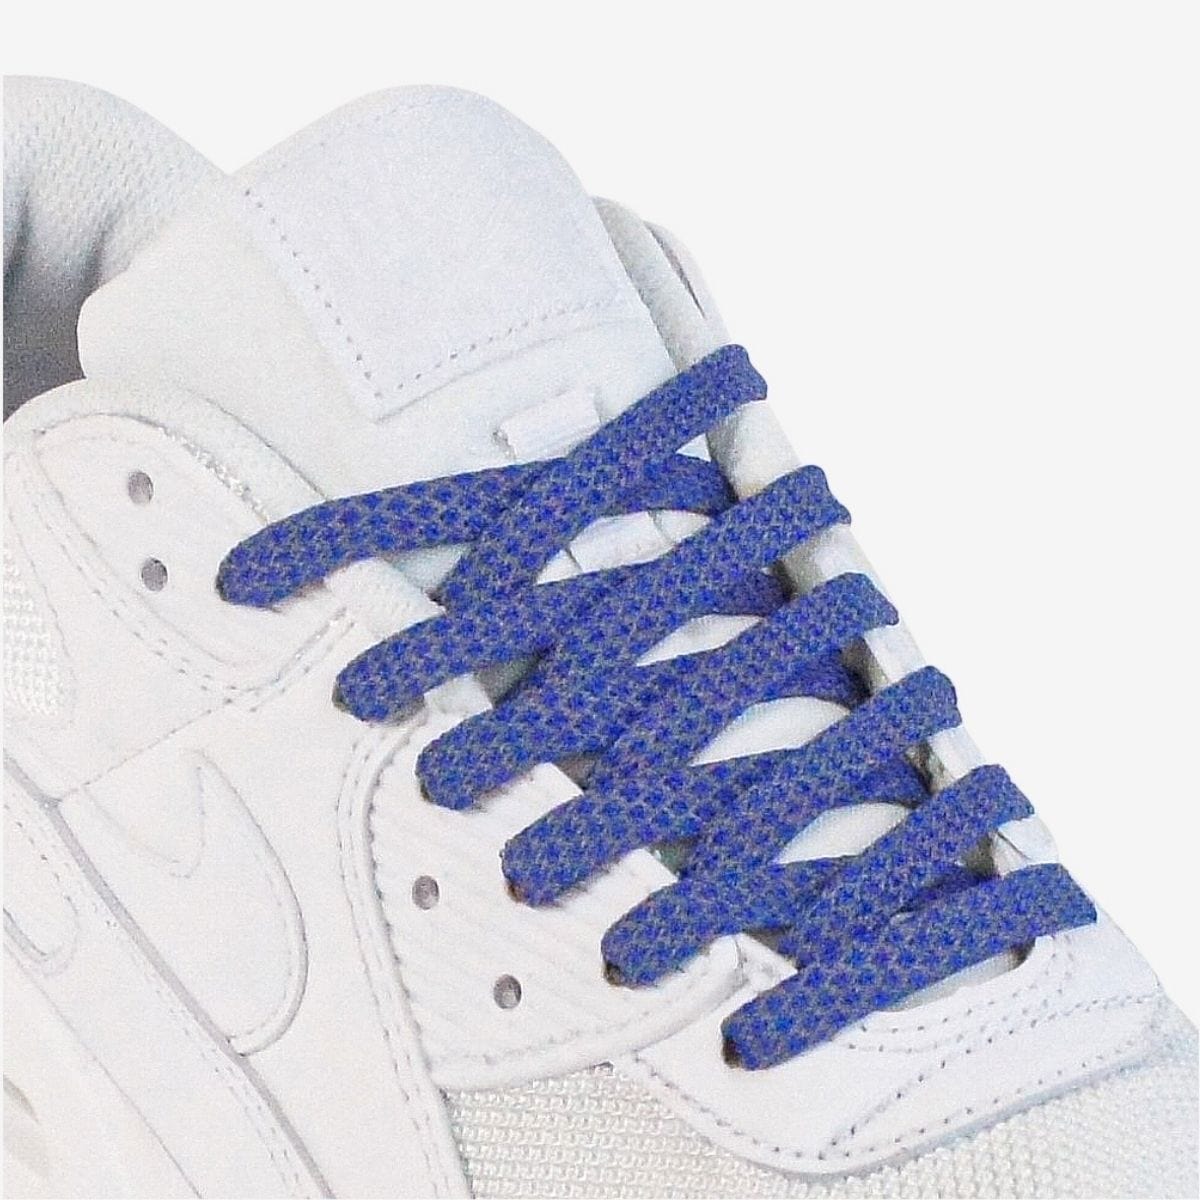 reflective-flat-shoelaces-in-blue-suitable-for-popular-sneakers